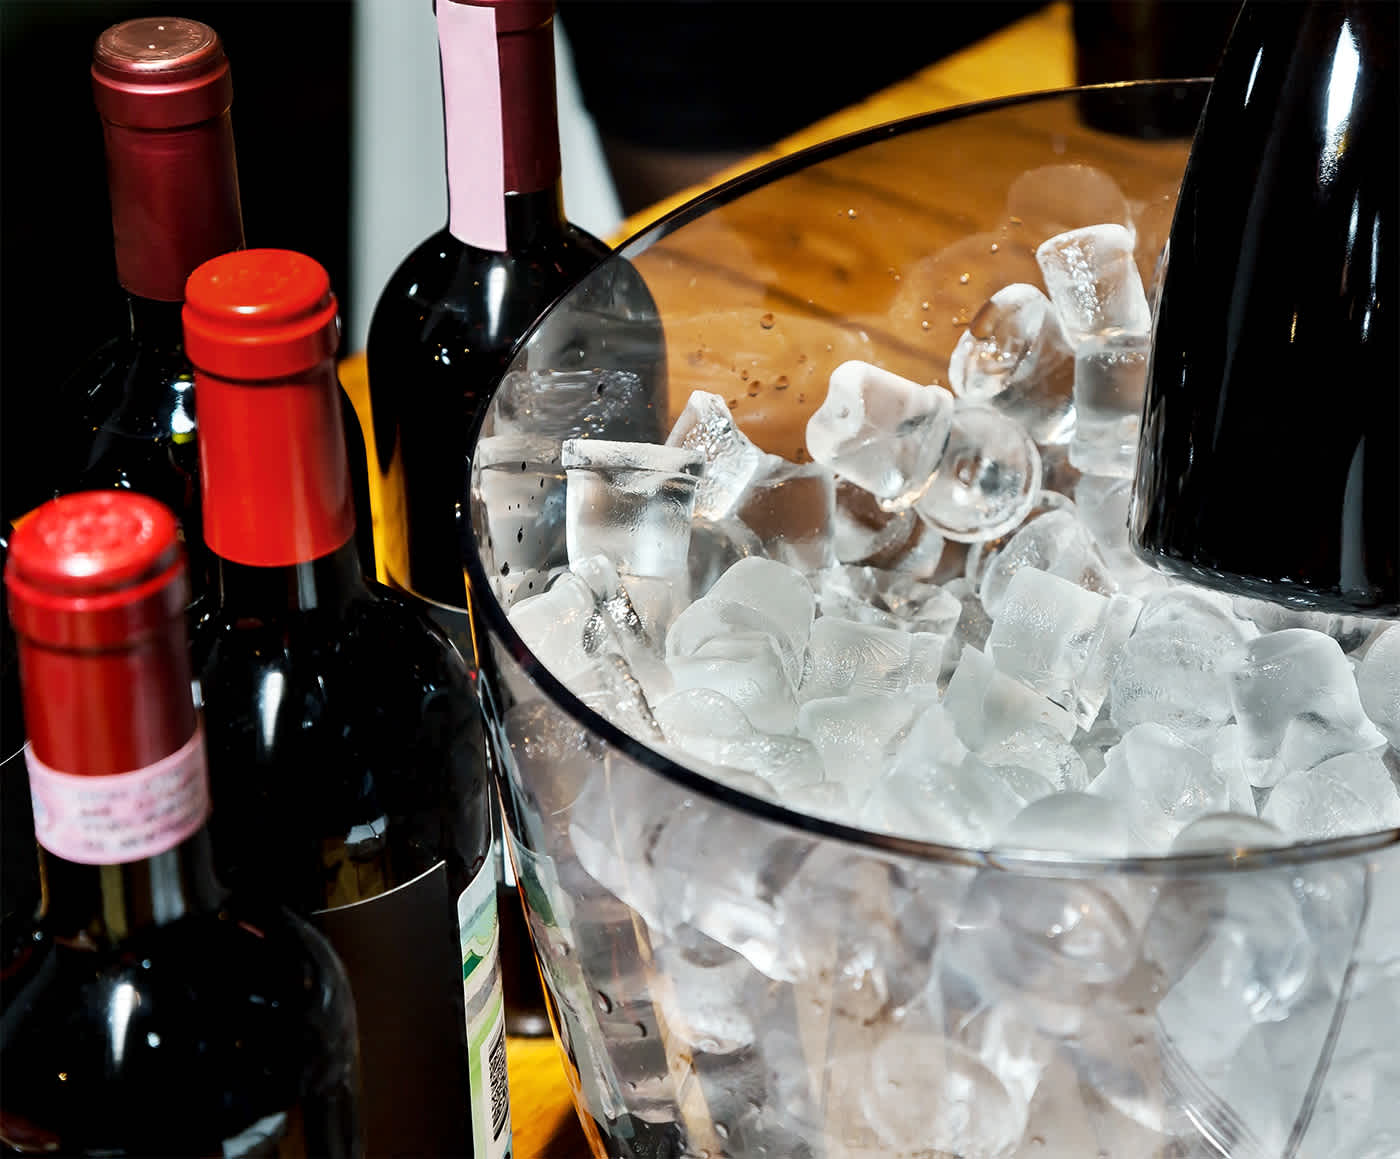 Wine being chilled in an ice bucket